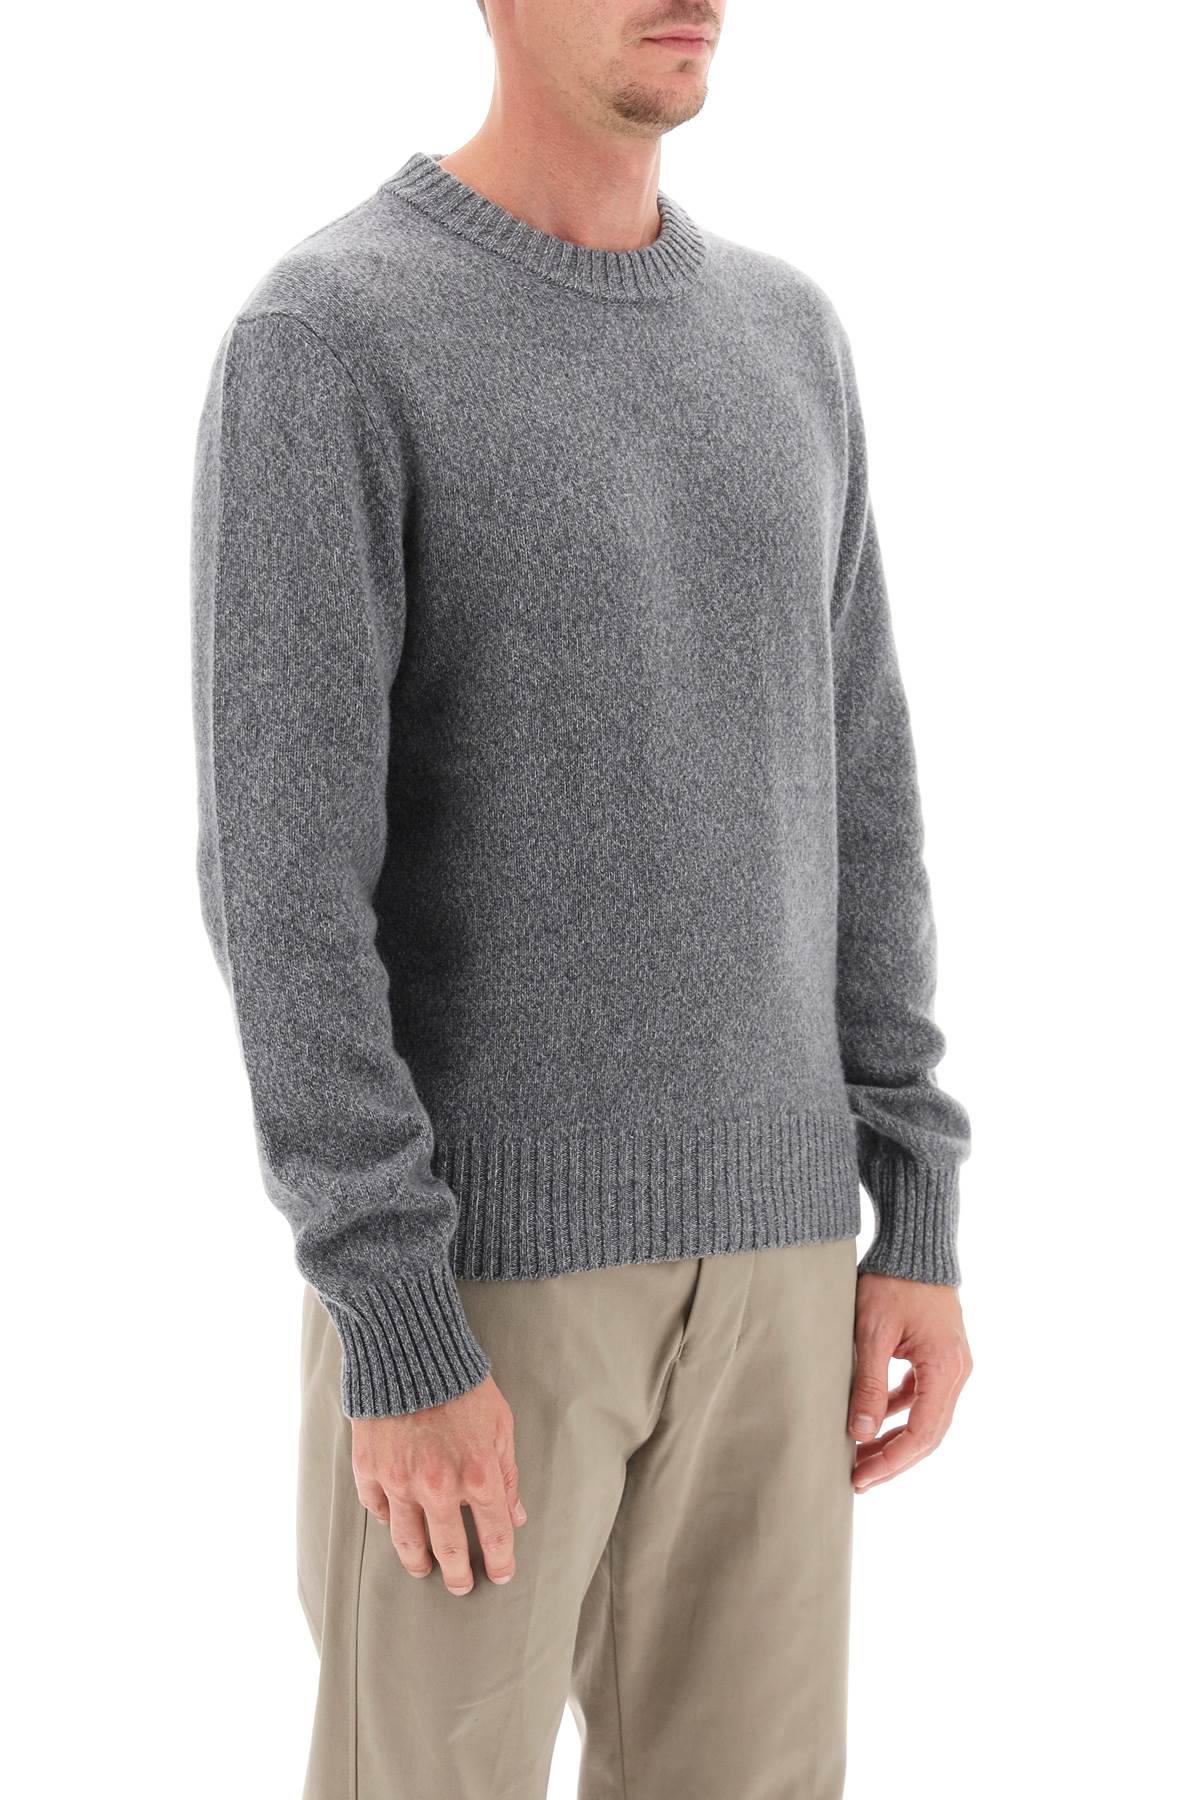 Shop Ami Alexandre Mattiussi Cashmere And Wool Sweater In Heather Grey (grey)